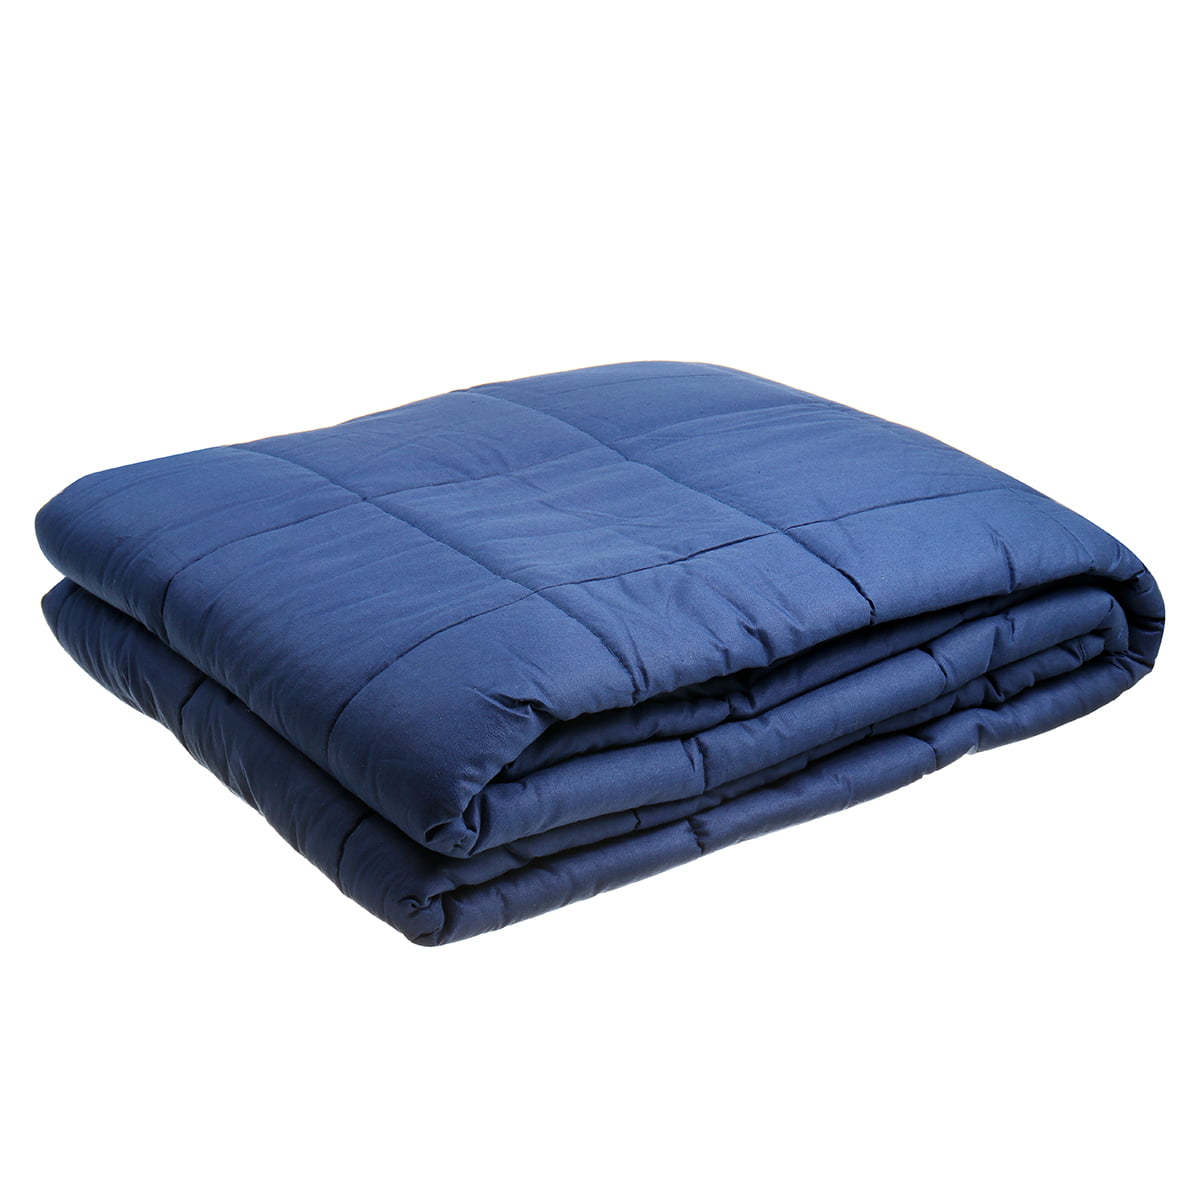 10lbs / 15lbs Weighted Blanket, Queen/King Size 5-Layer Soft Cotton w